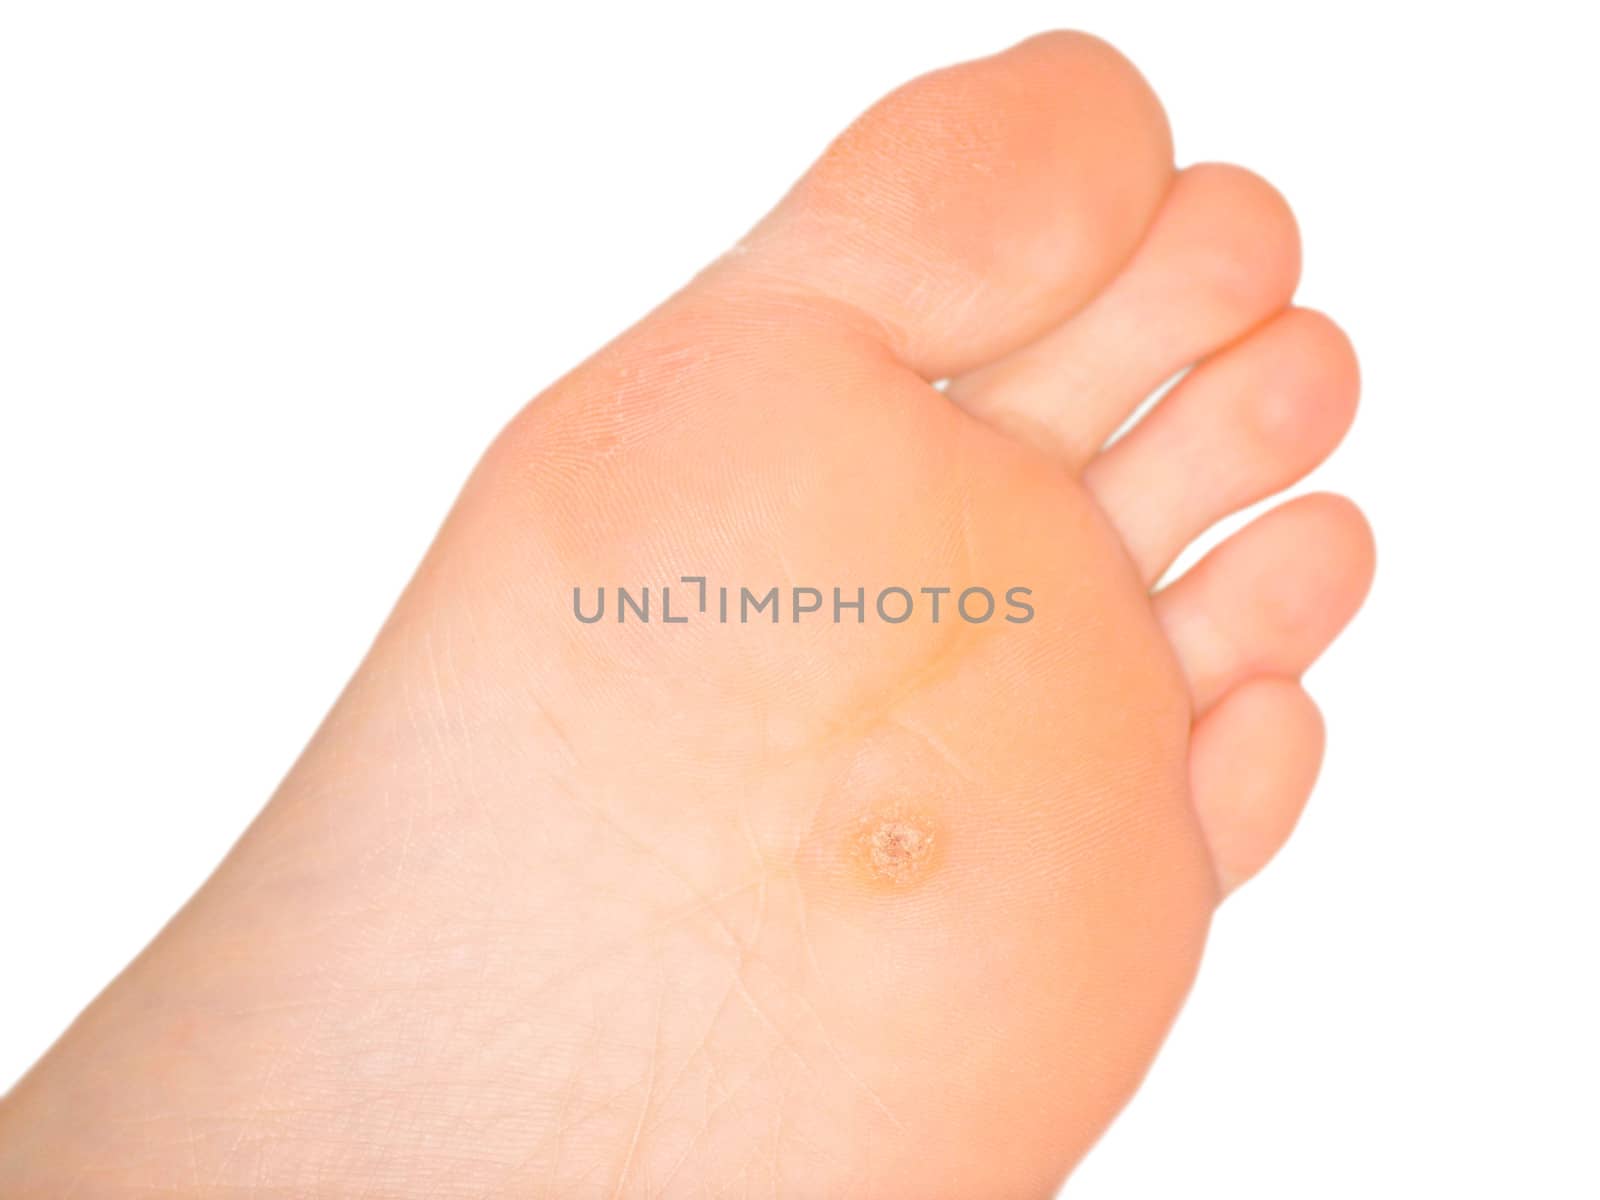 Callus under foot, center of foot, isolated towards white